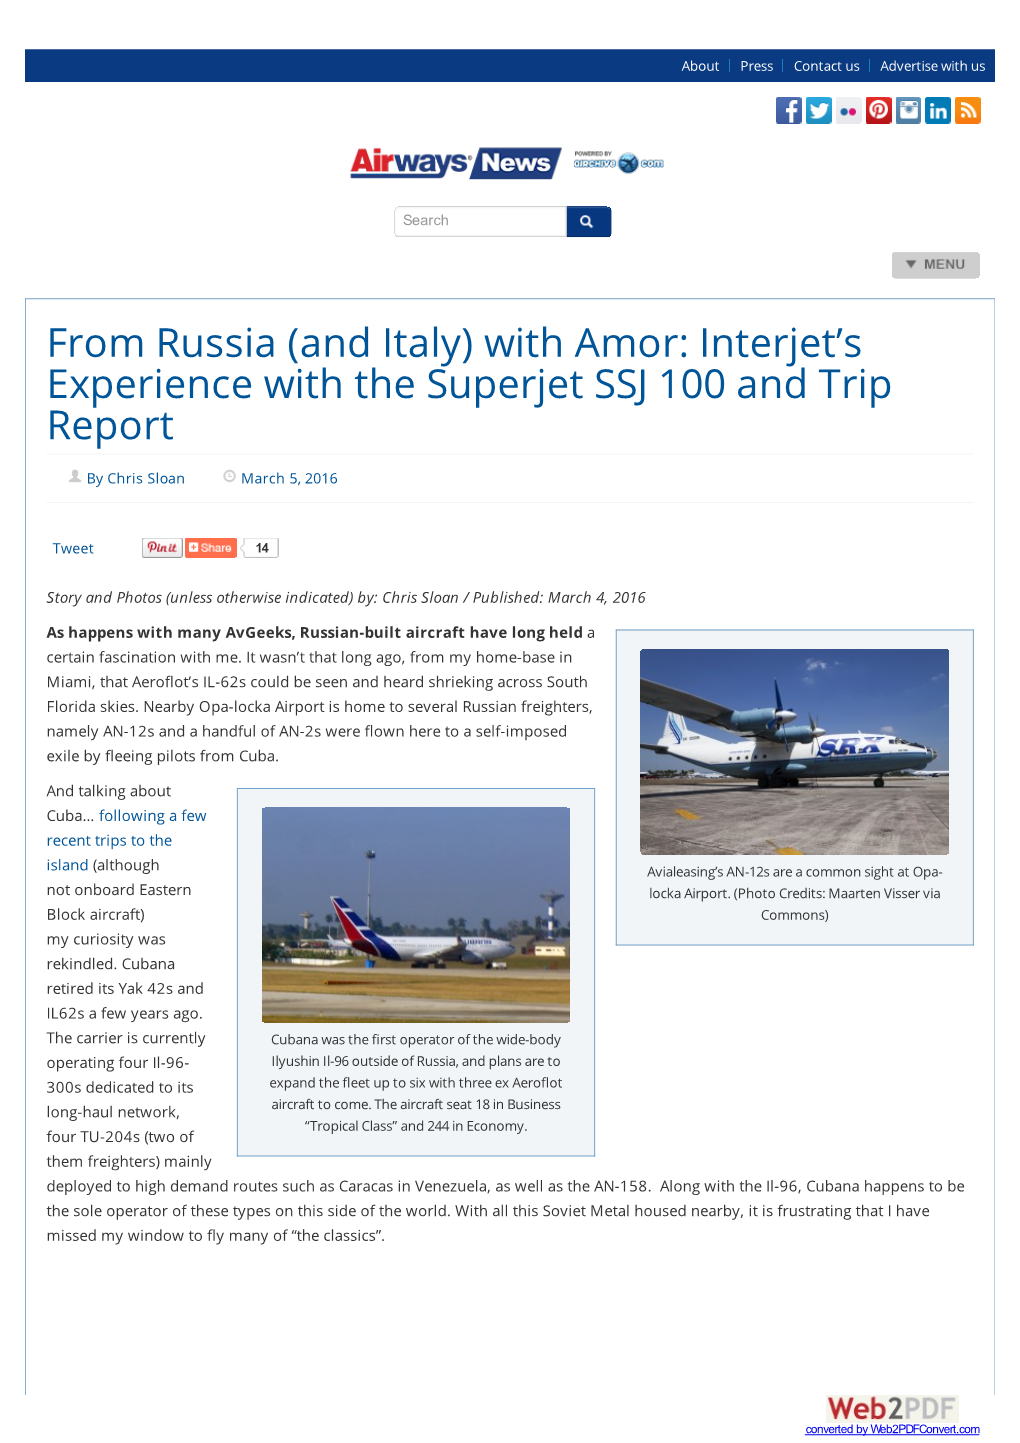 Interjet's Experience with the Superjet SSJ 100 and Trip Report